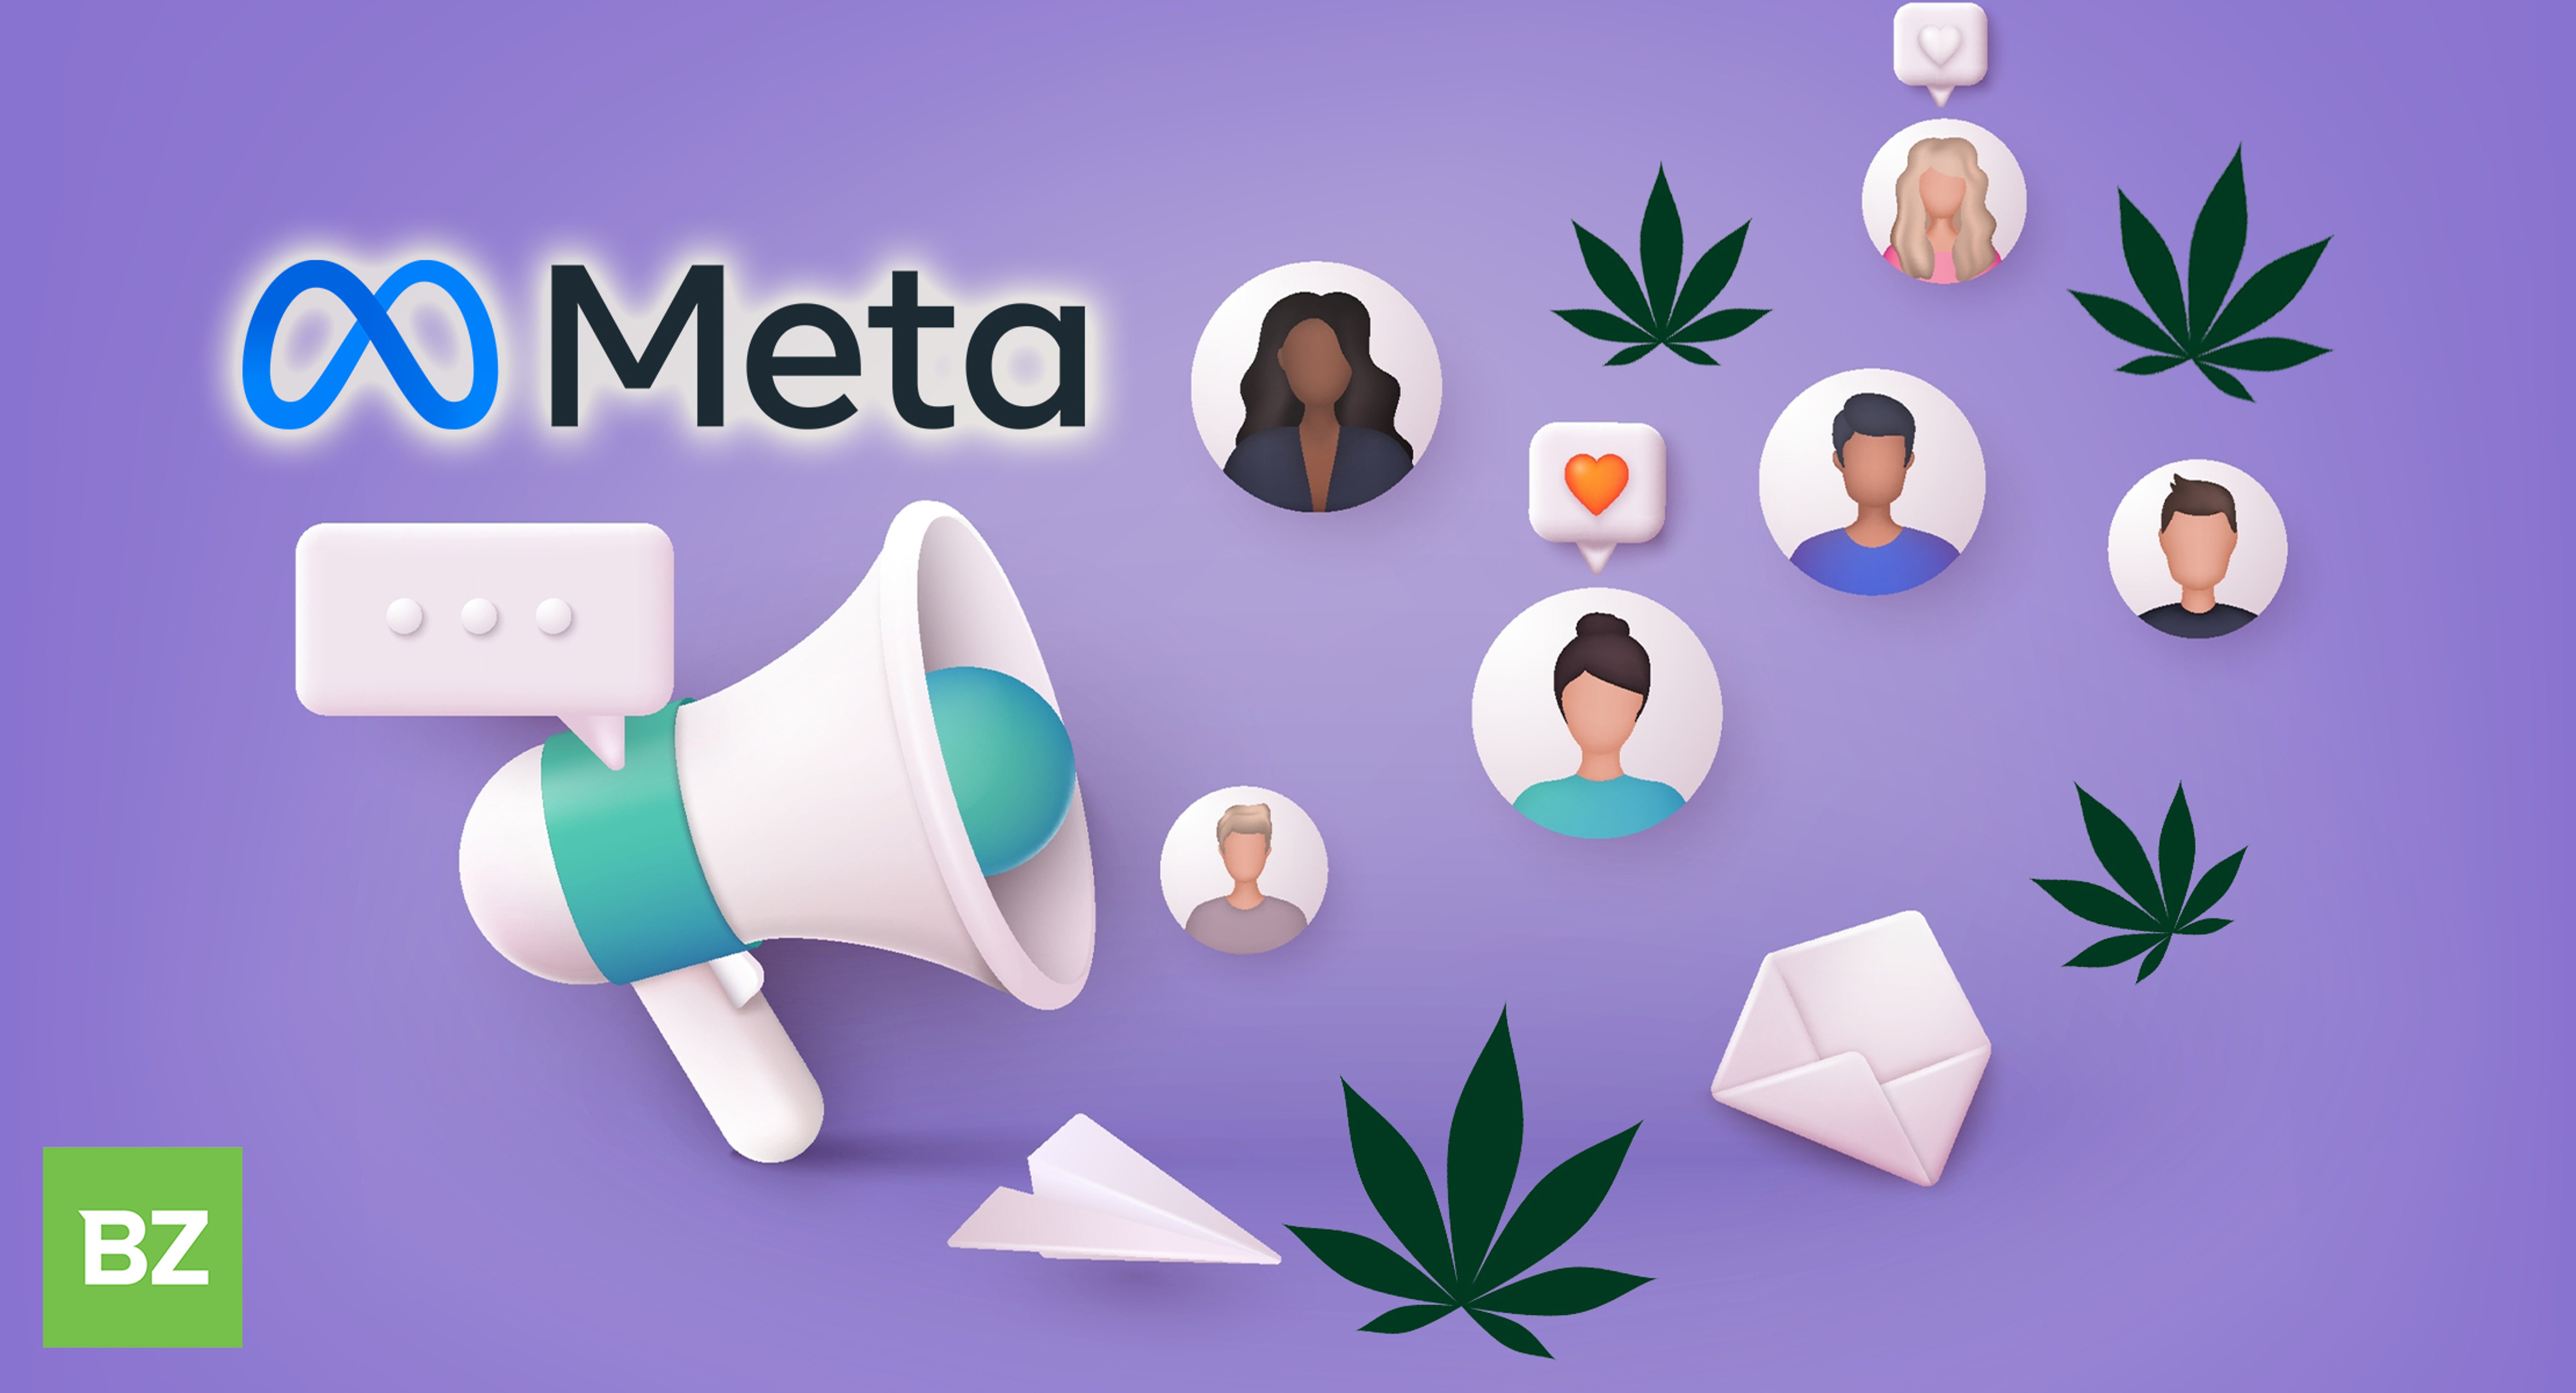 As Twitter Moves Forward With Cannabis Advertising, Meta Really Should Get With The Program